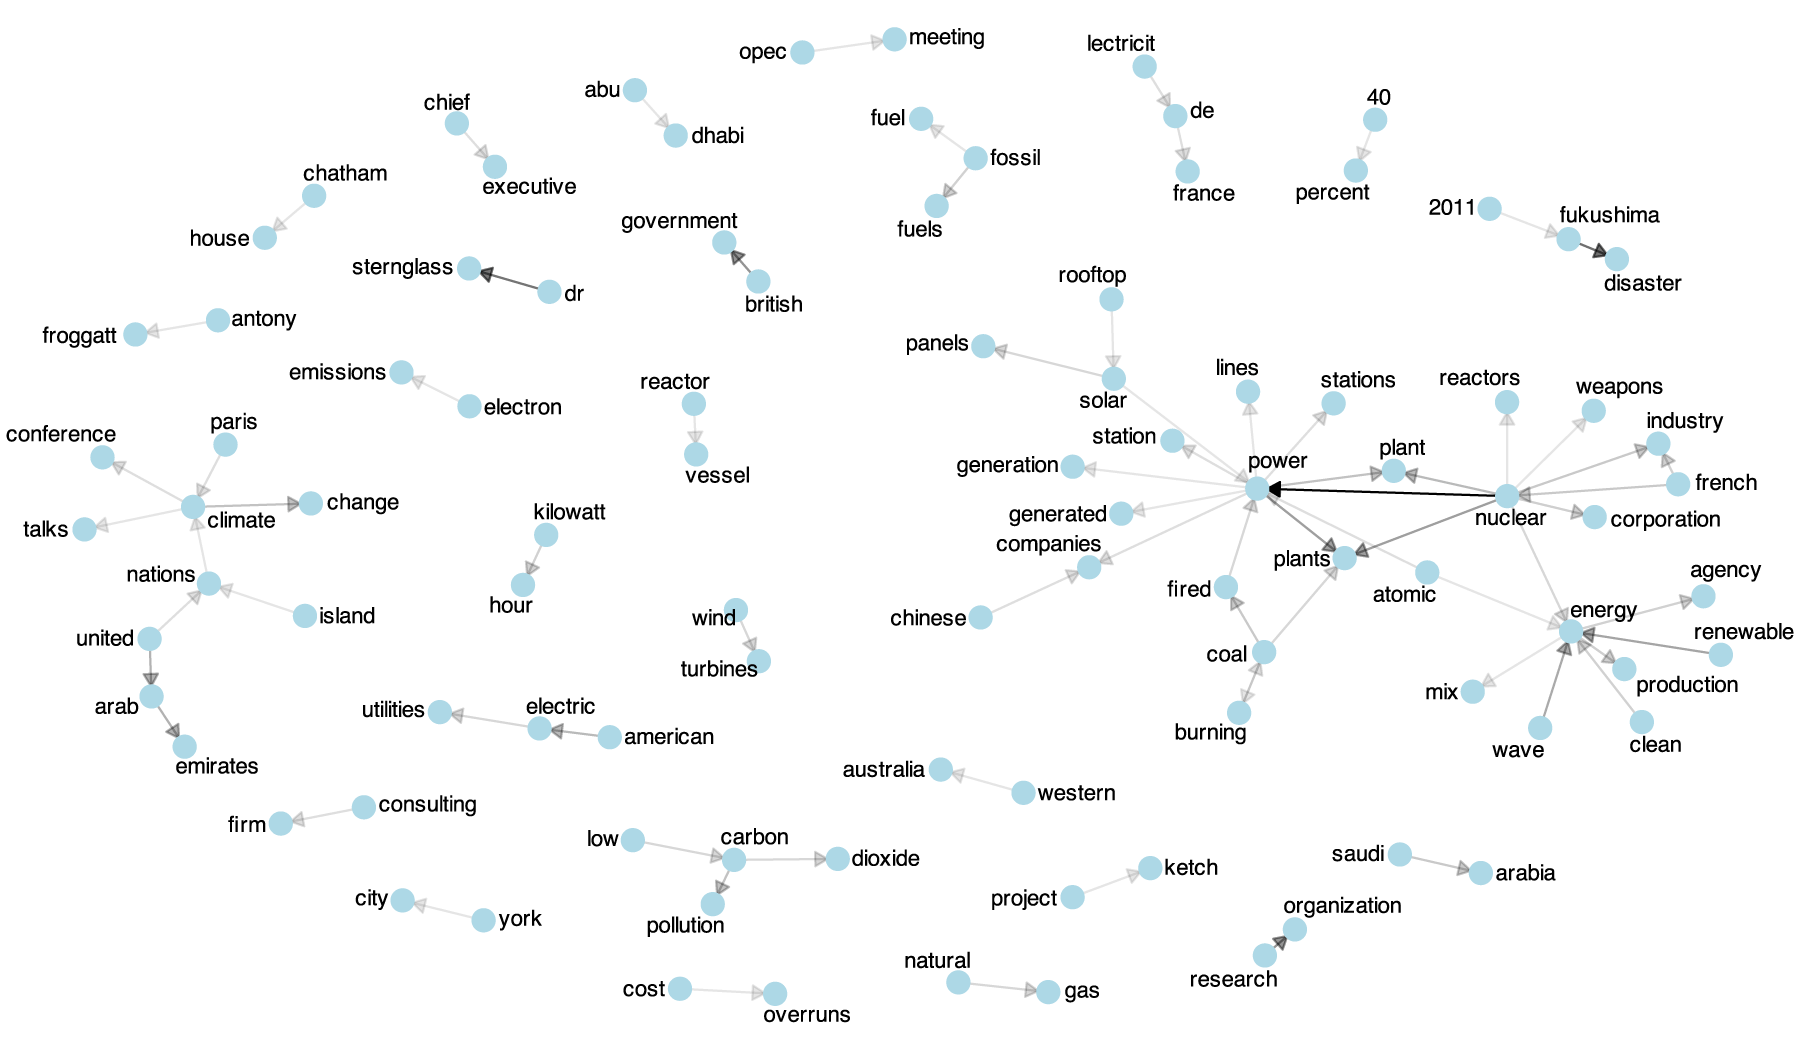 Network map of topics discussed in the news media in 2015